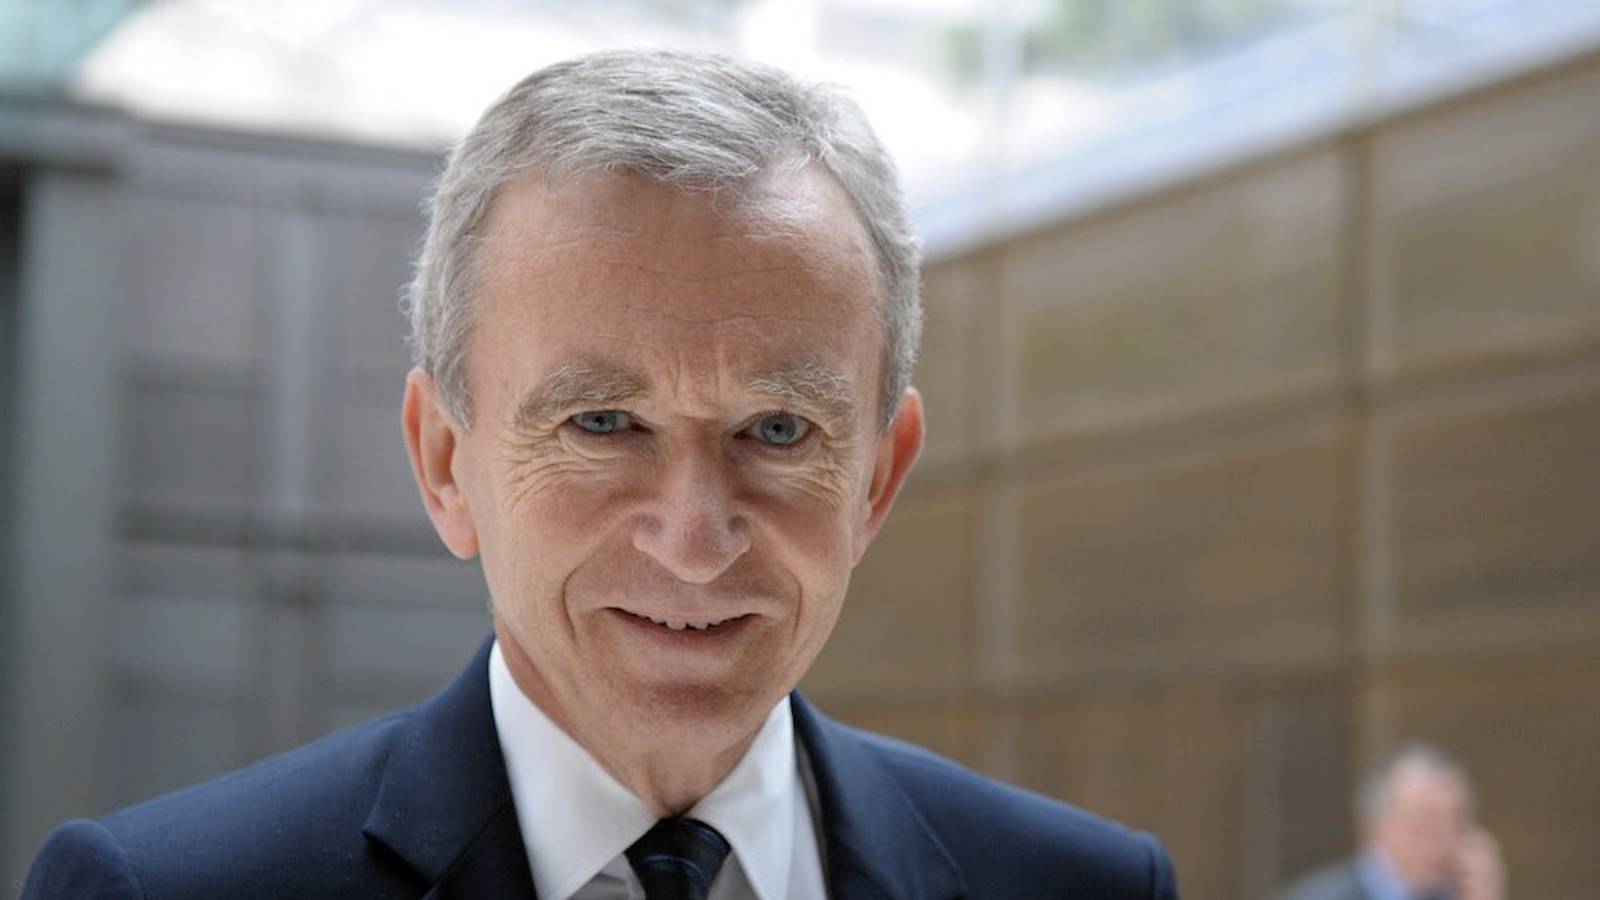 Groupe Arnault and LVMH join Catterton to set up buyout firm